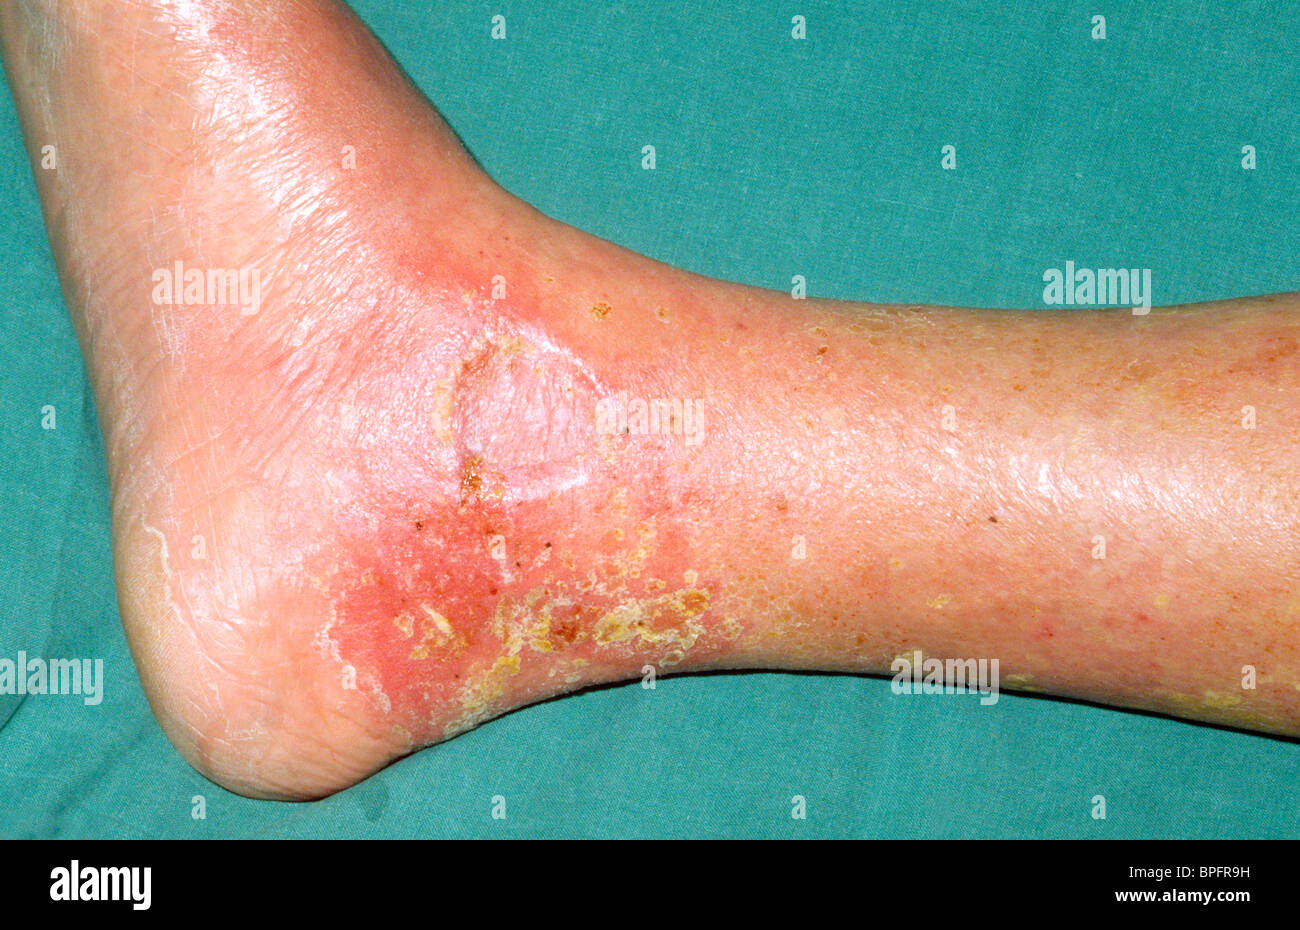 An example of necrotic lesions on the lower leg in which the superficial epithelium is destroyed and deeper tissues are exposed Stock Photo